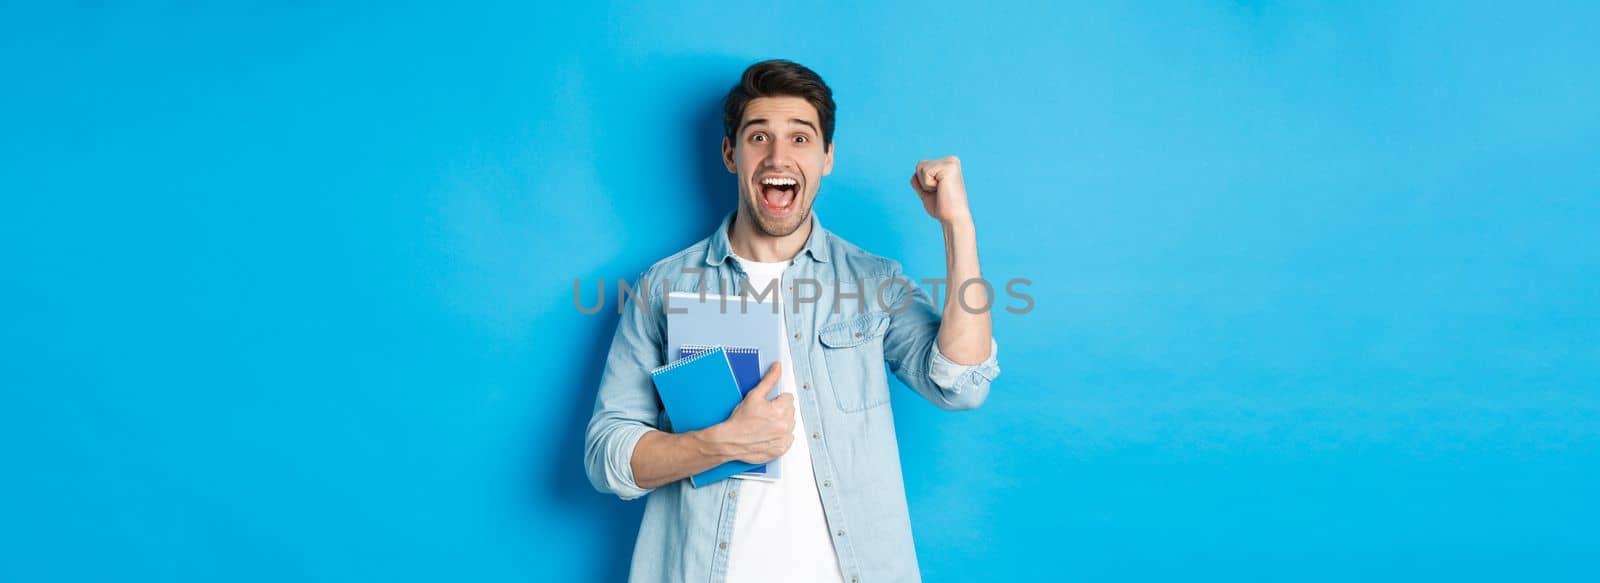 Cheerful guy holding notebooks and celebrating, making fist pump and shouting yes with excitement, standing over blue background.